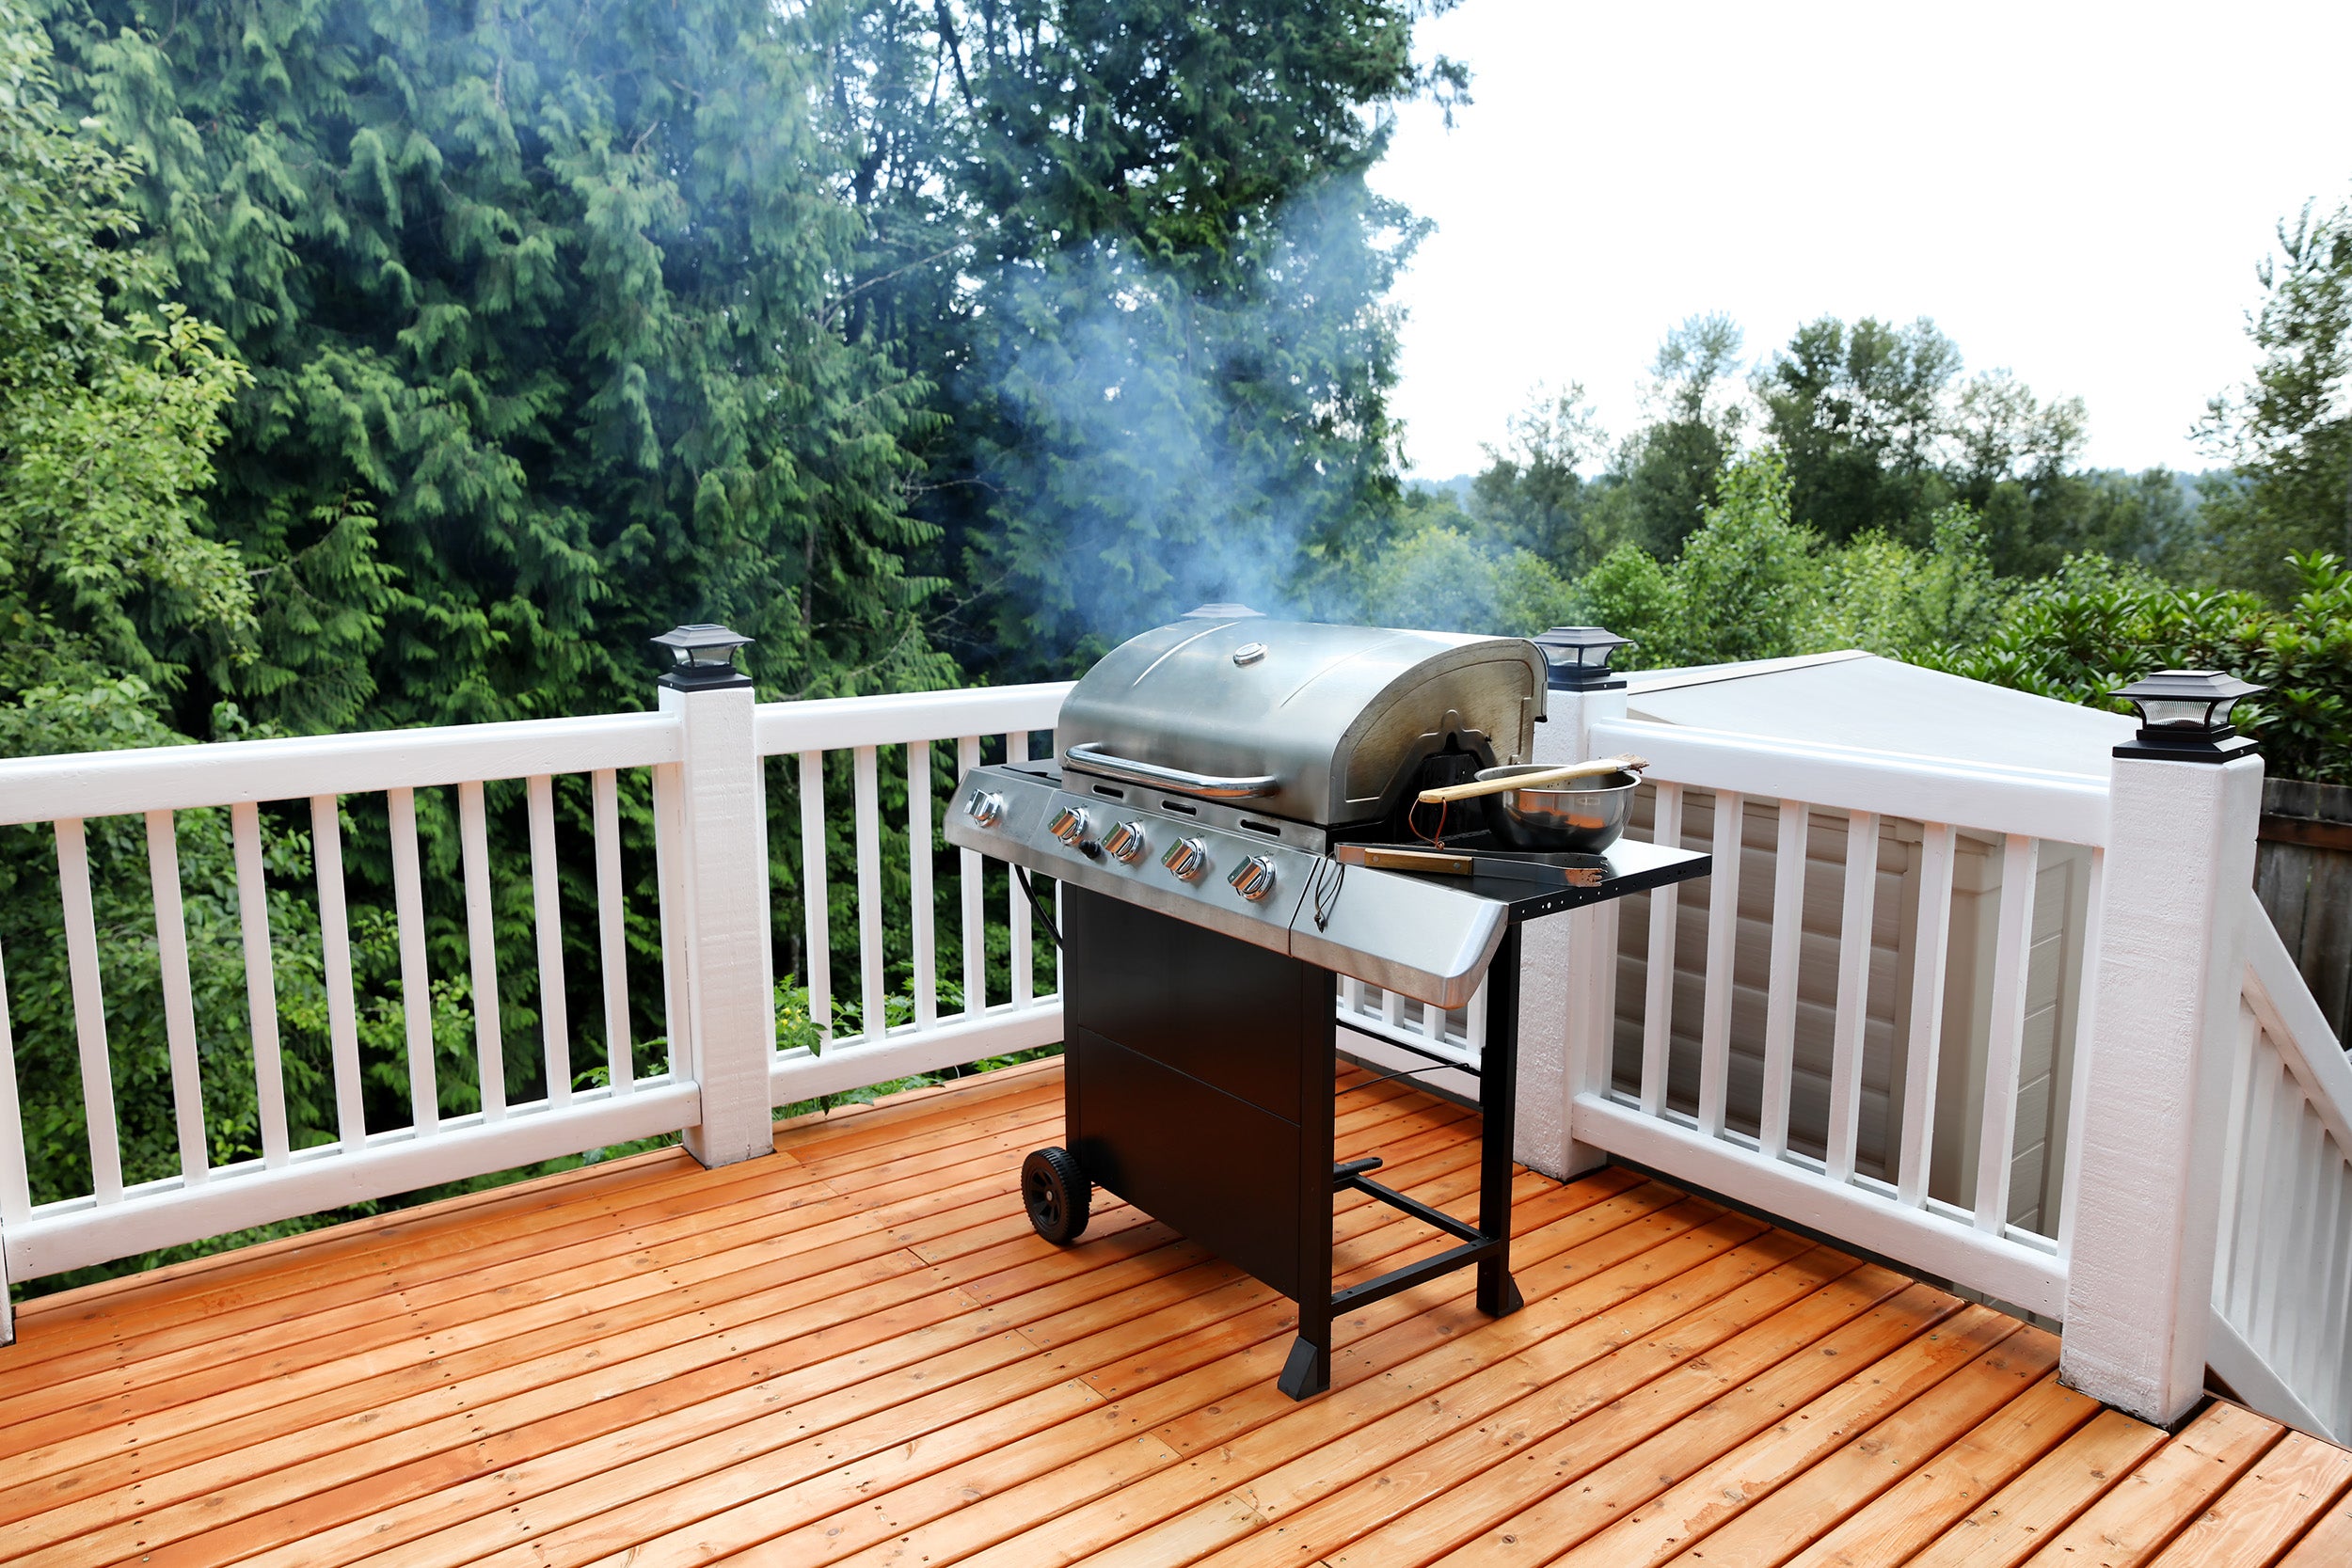 Barbecue grill cooking with visual smoke in open outdoor deck du